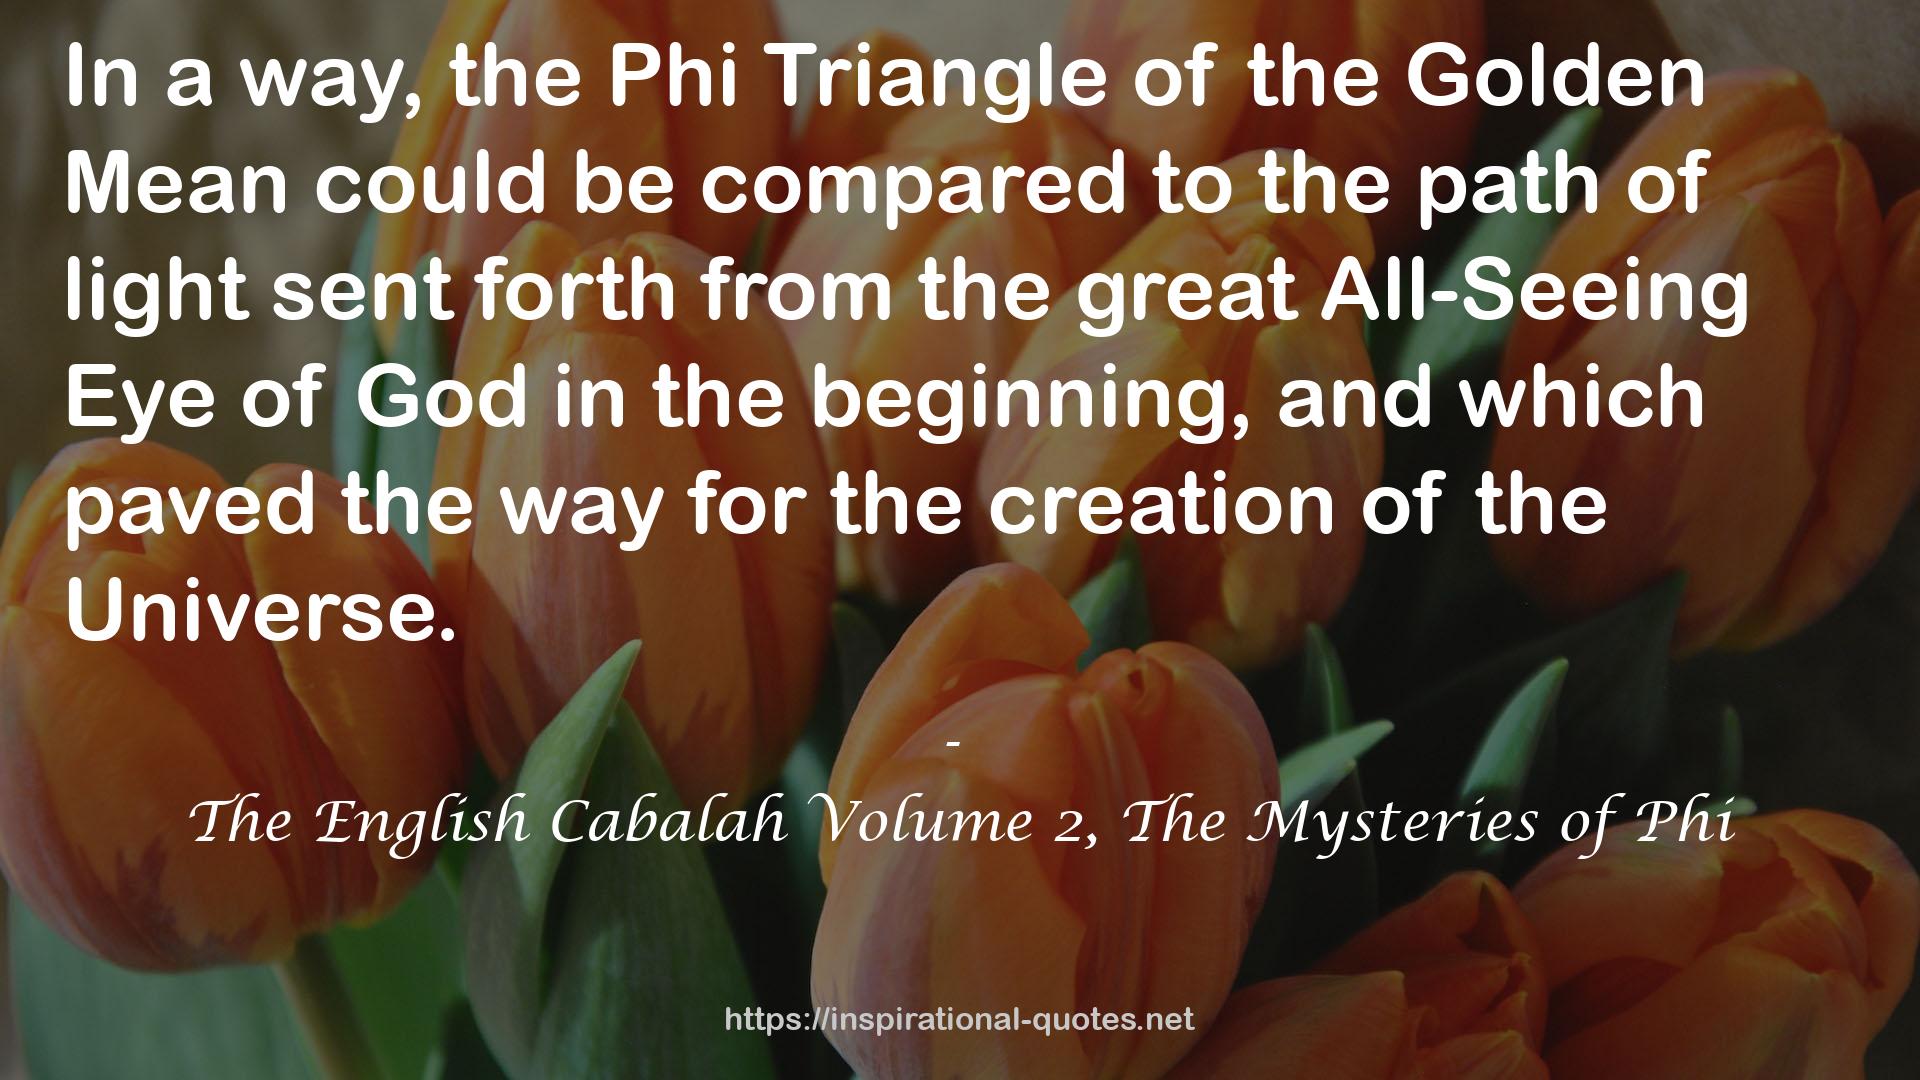 The English Cabalah Volume 2, The Mysteries of Phi QUOTES